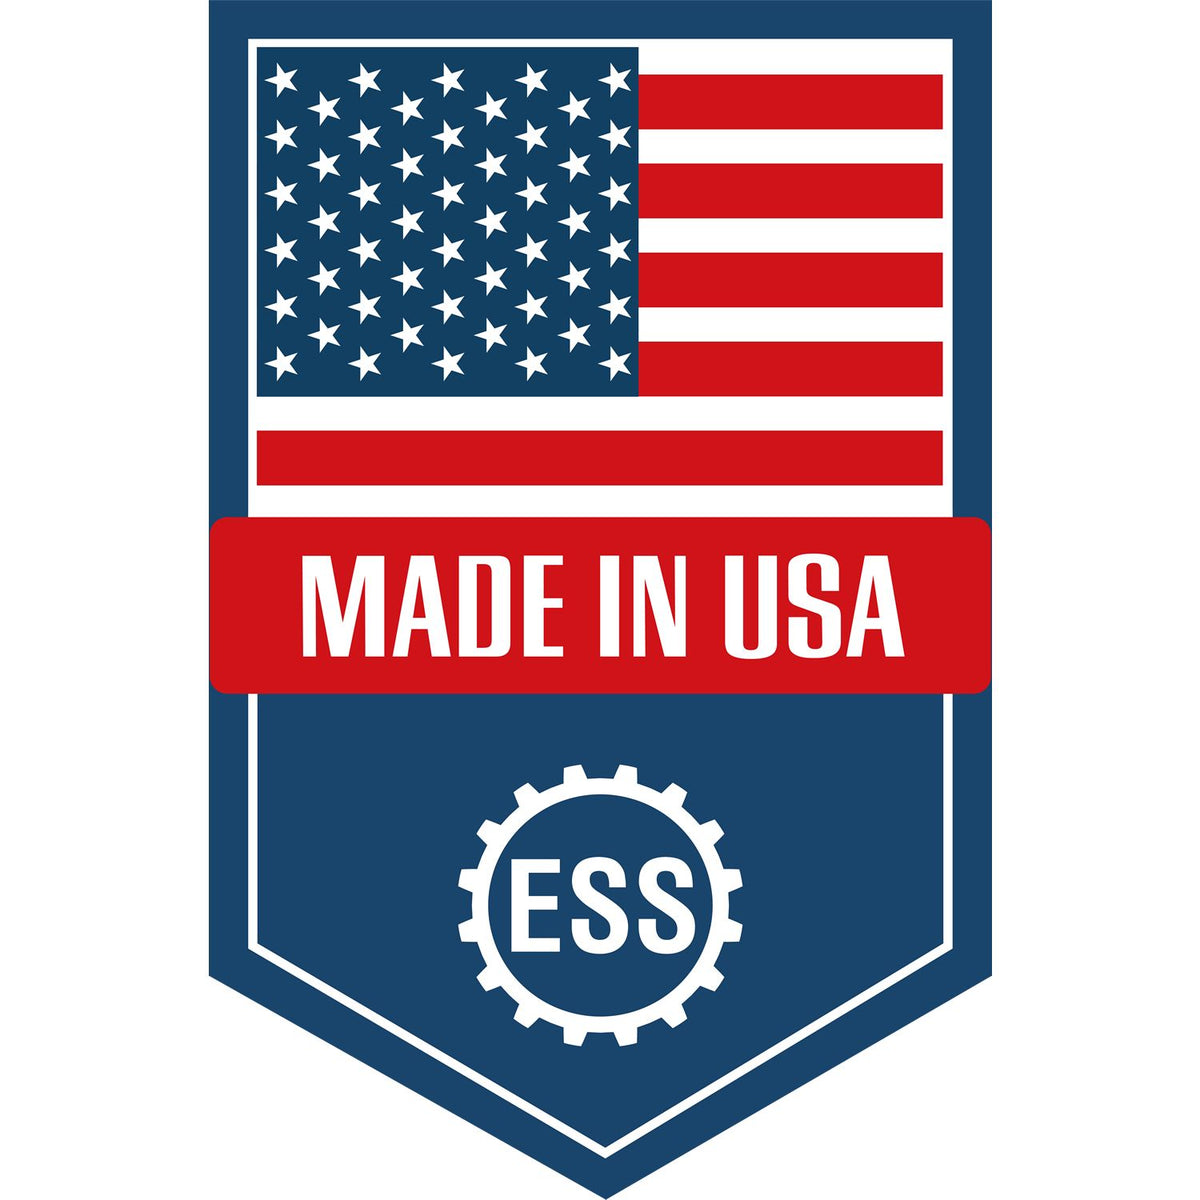 An icon or graphic with an american flag and text reading Made in USA for the Premium MaxLight Pre-Inked Minnesota Landscape Architectural Stamp